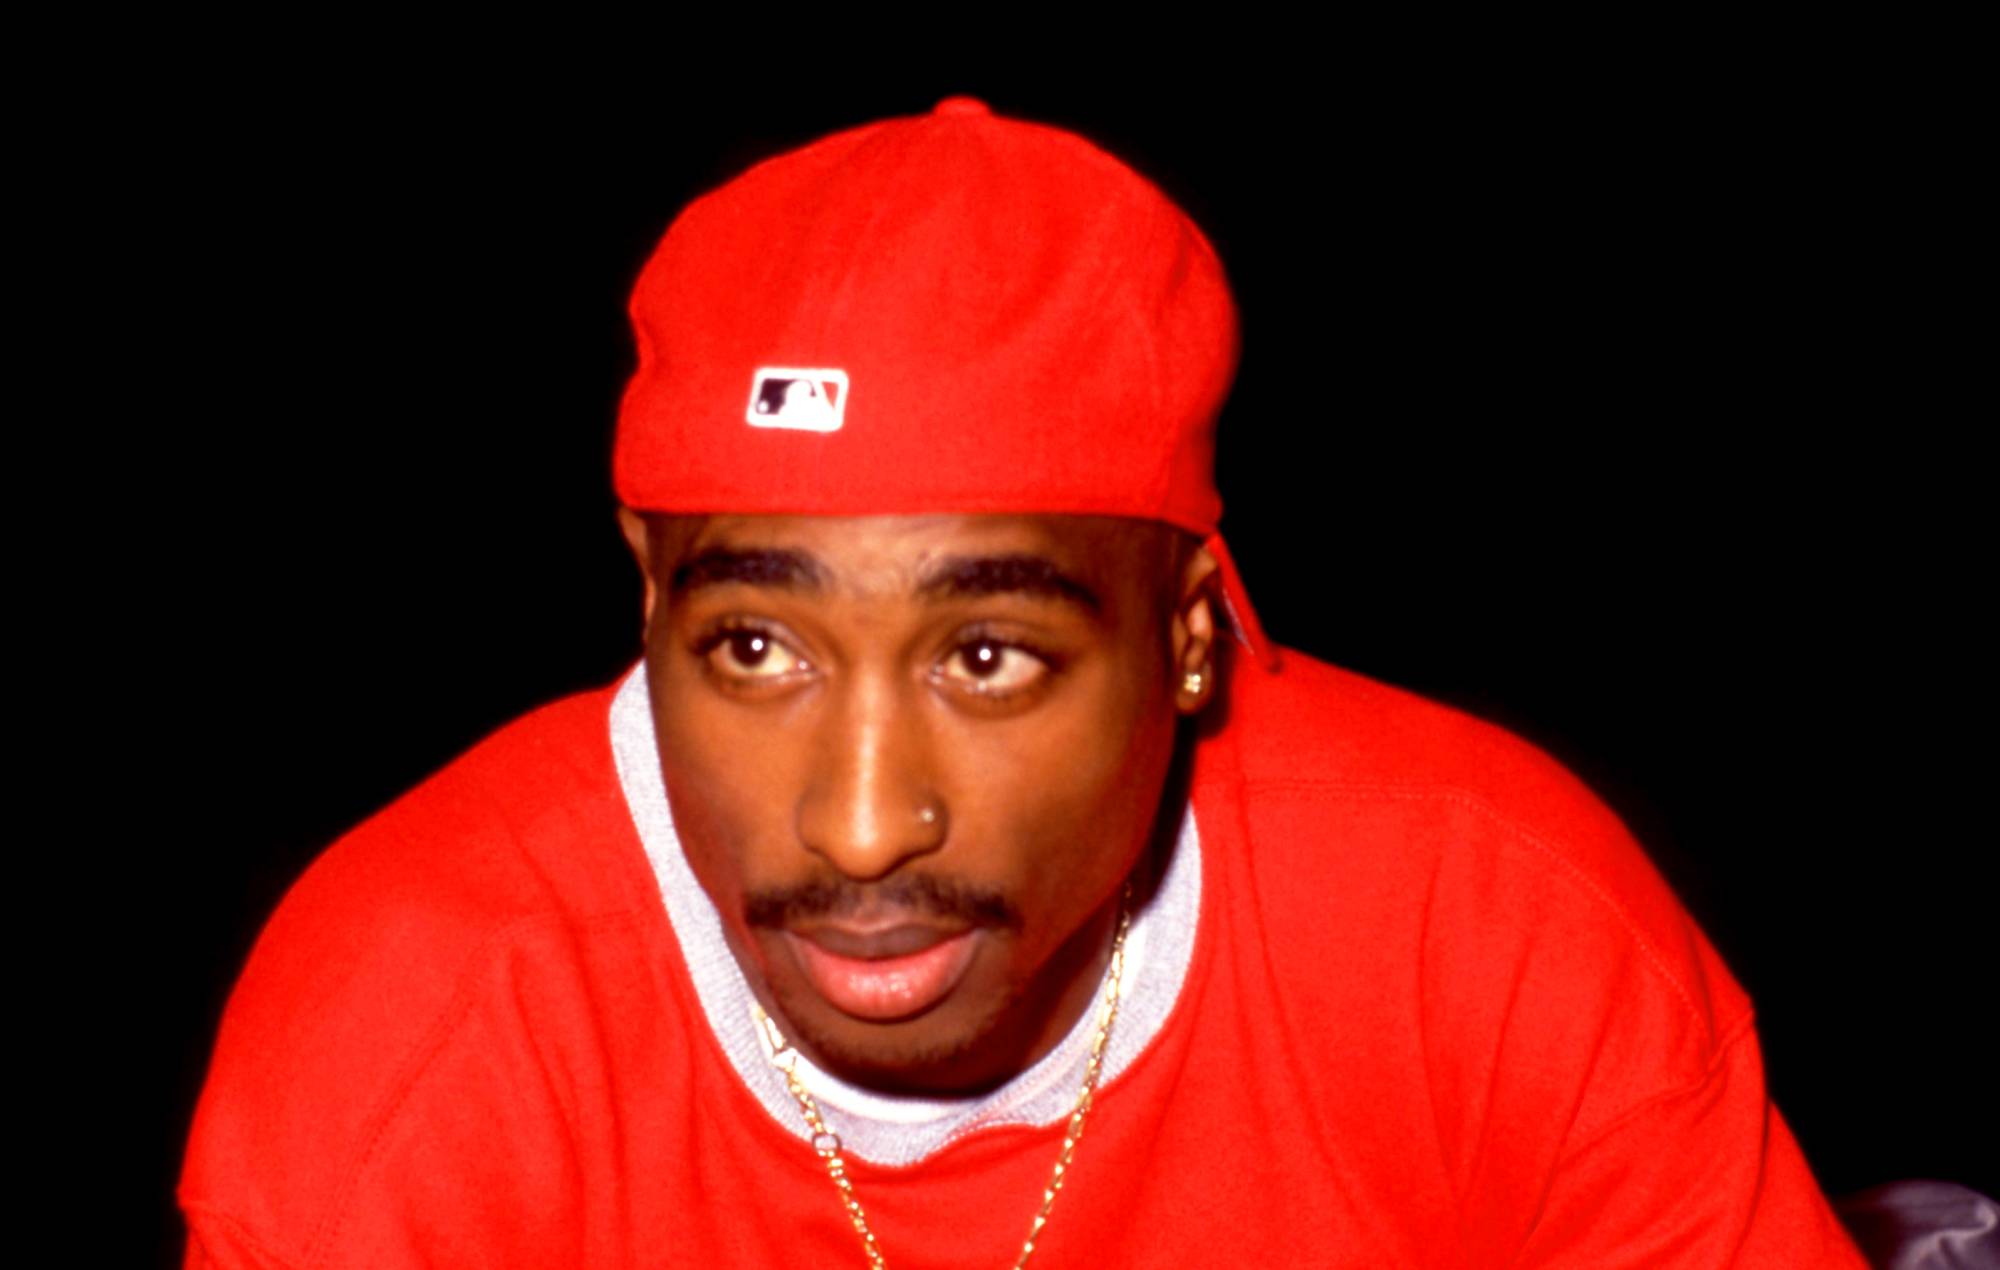 Tupac murder investigation: Police seize hard drives and laptops at house